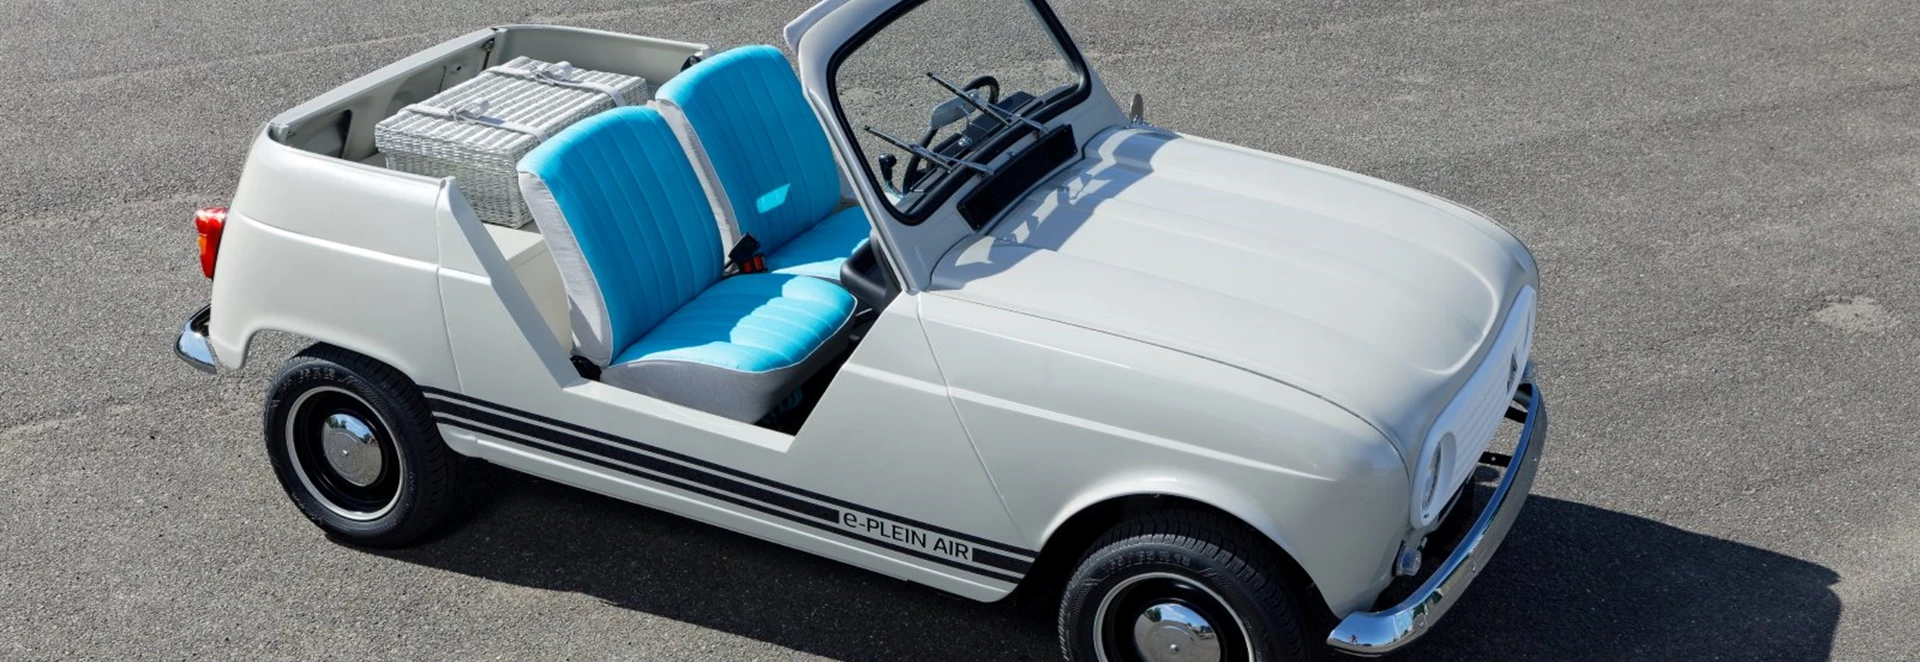 Renault unveils retro classic model with electric underpinnings